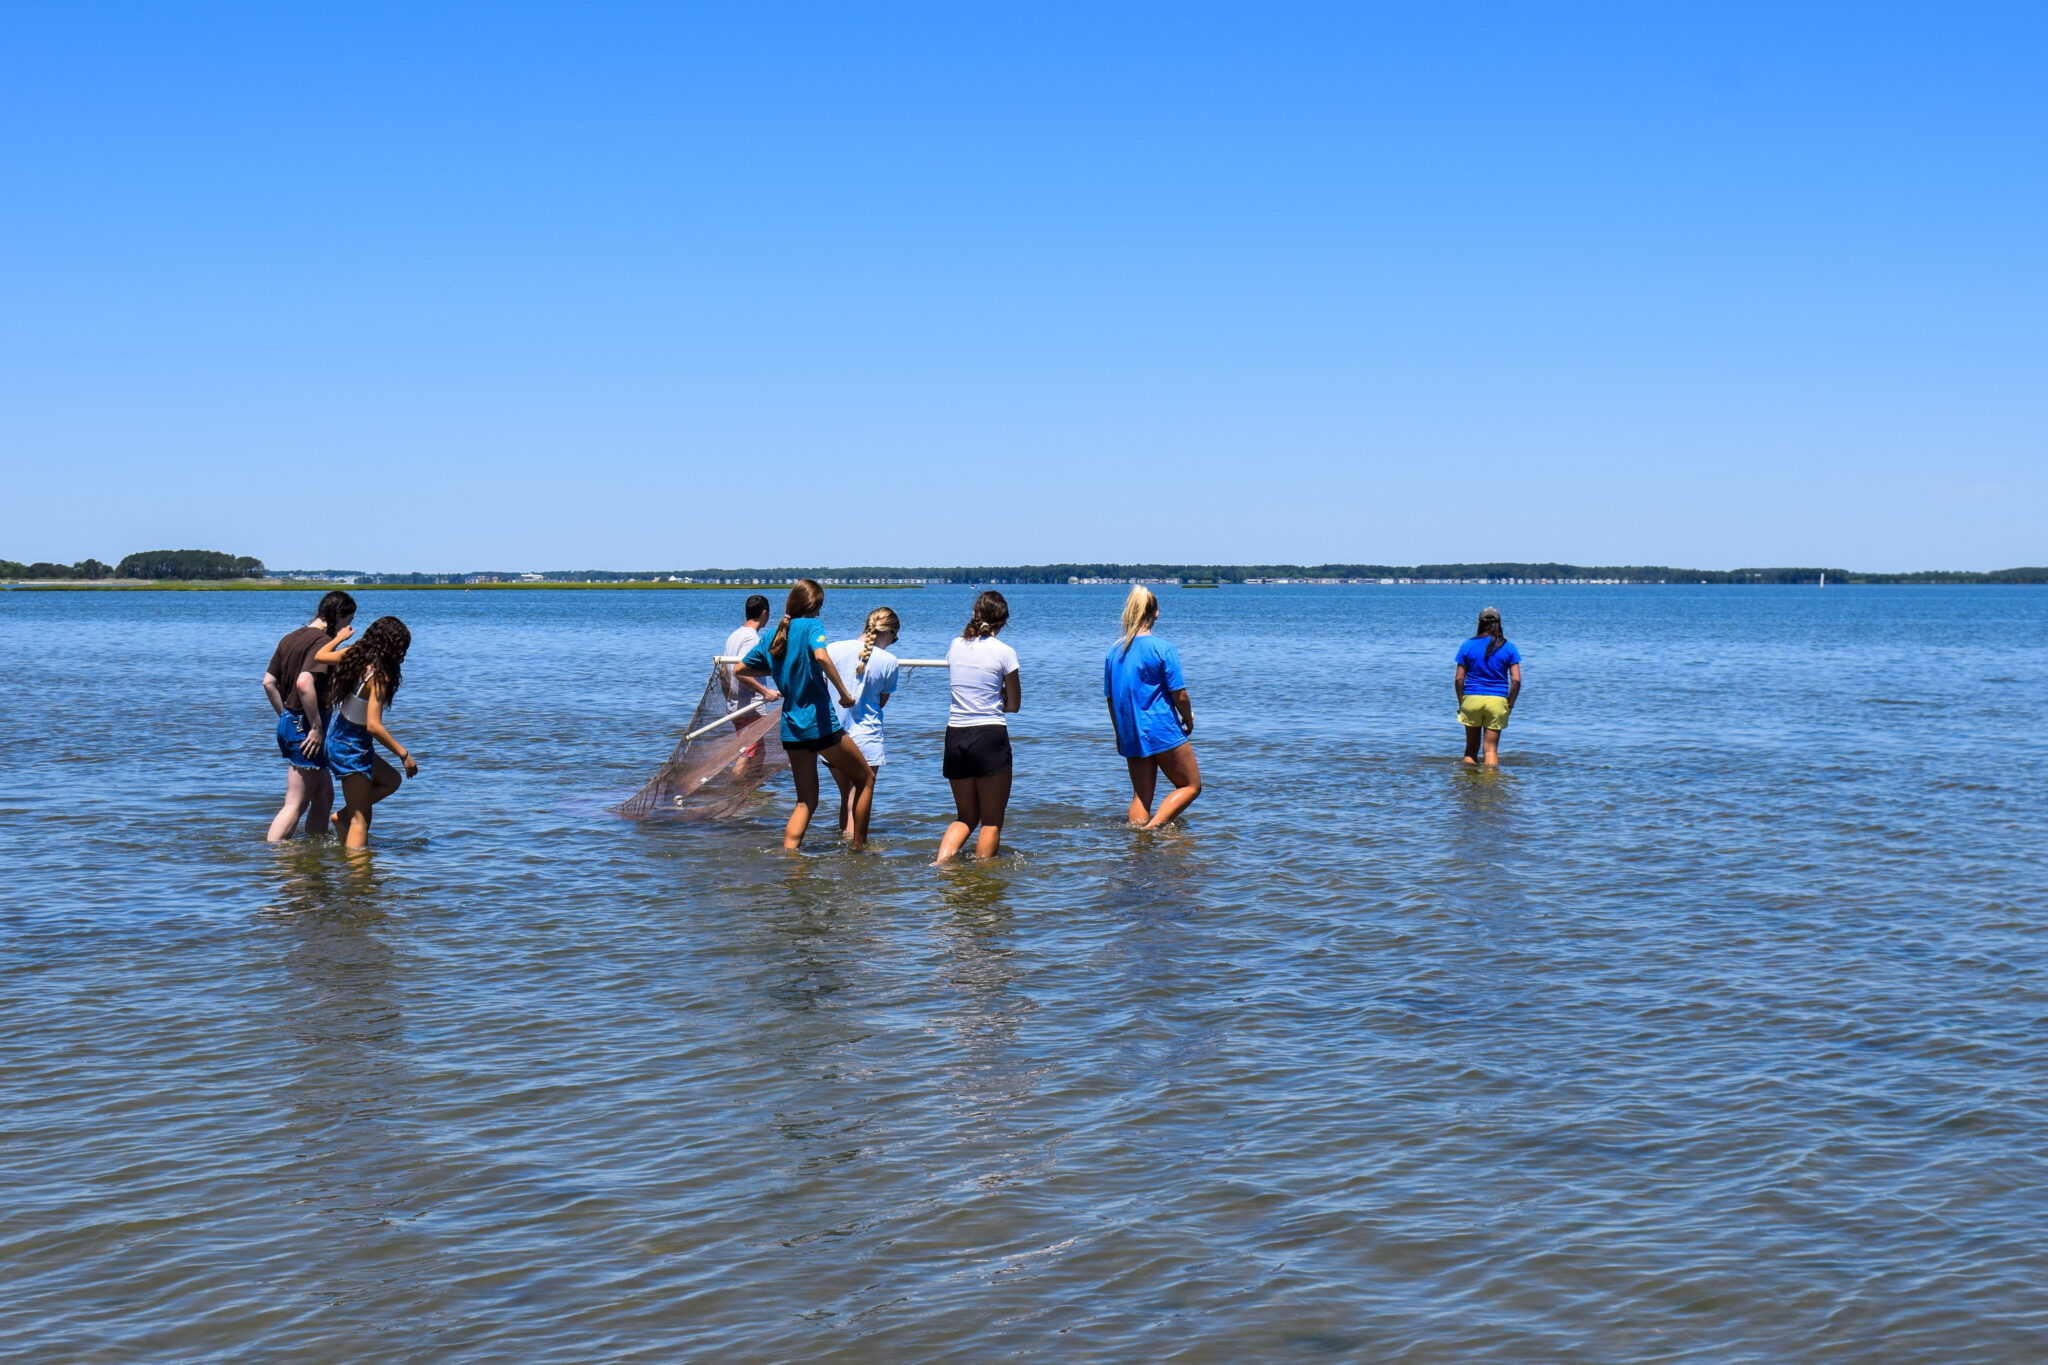 several people are standing in the water with a net